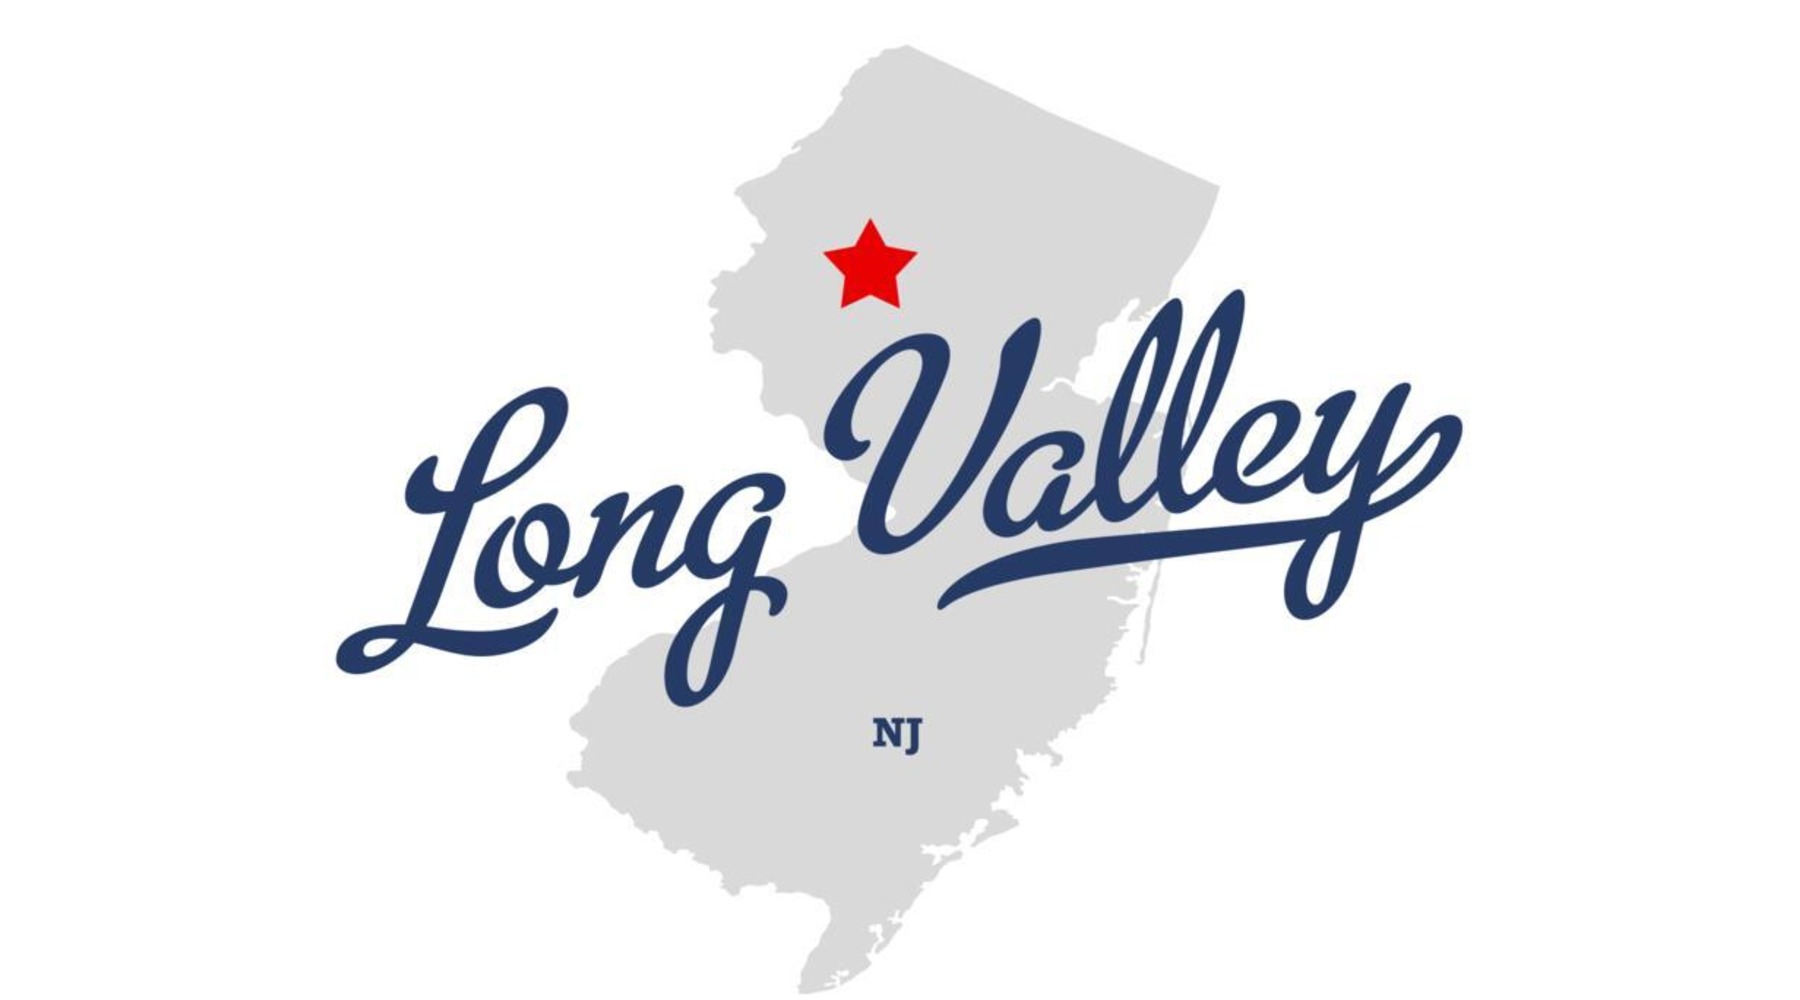 Long Valley, 07853